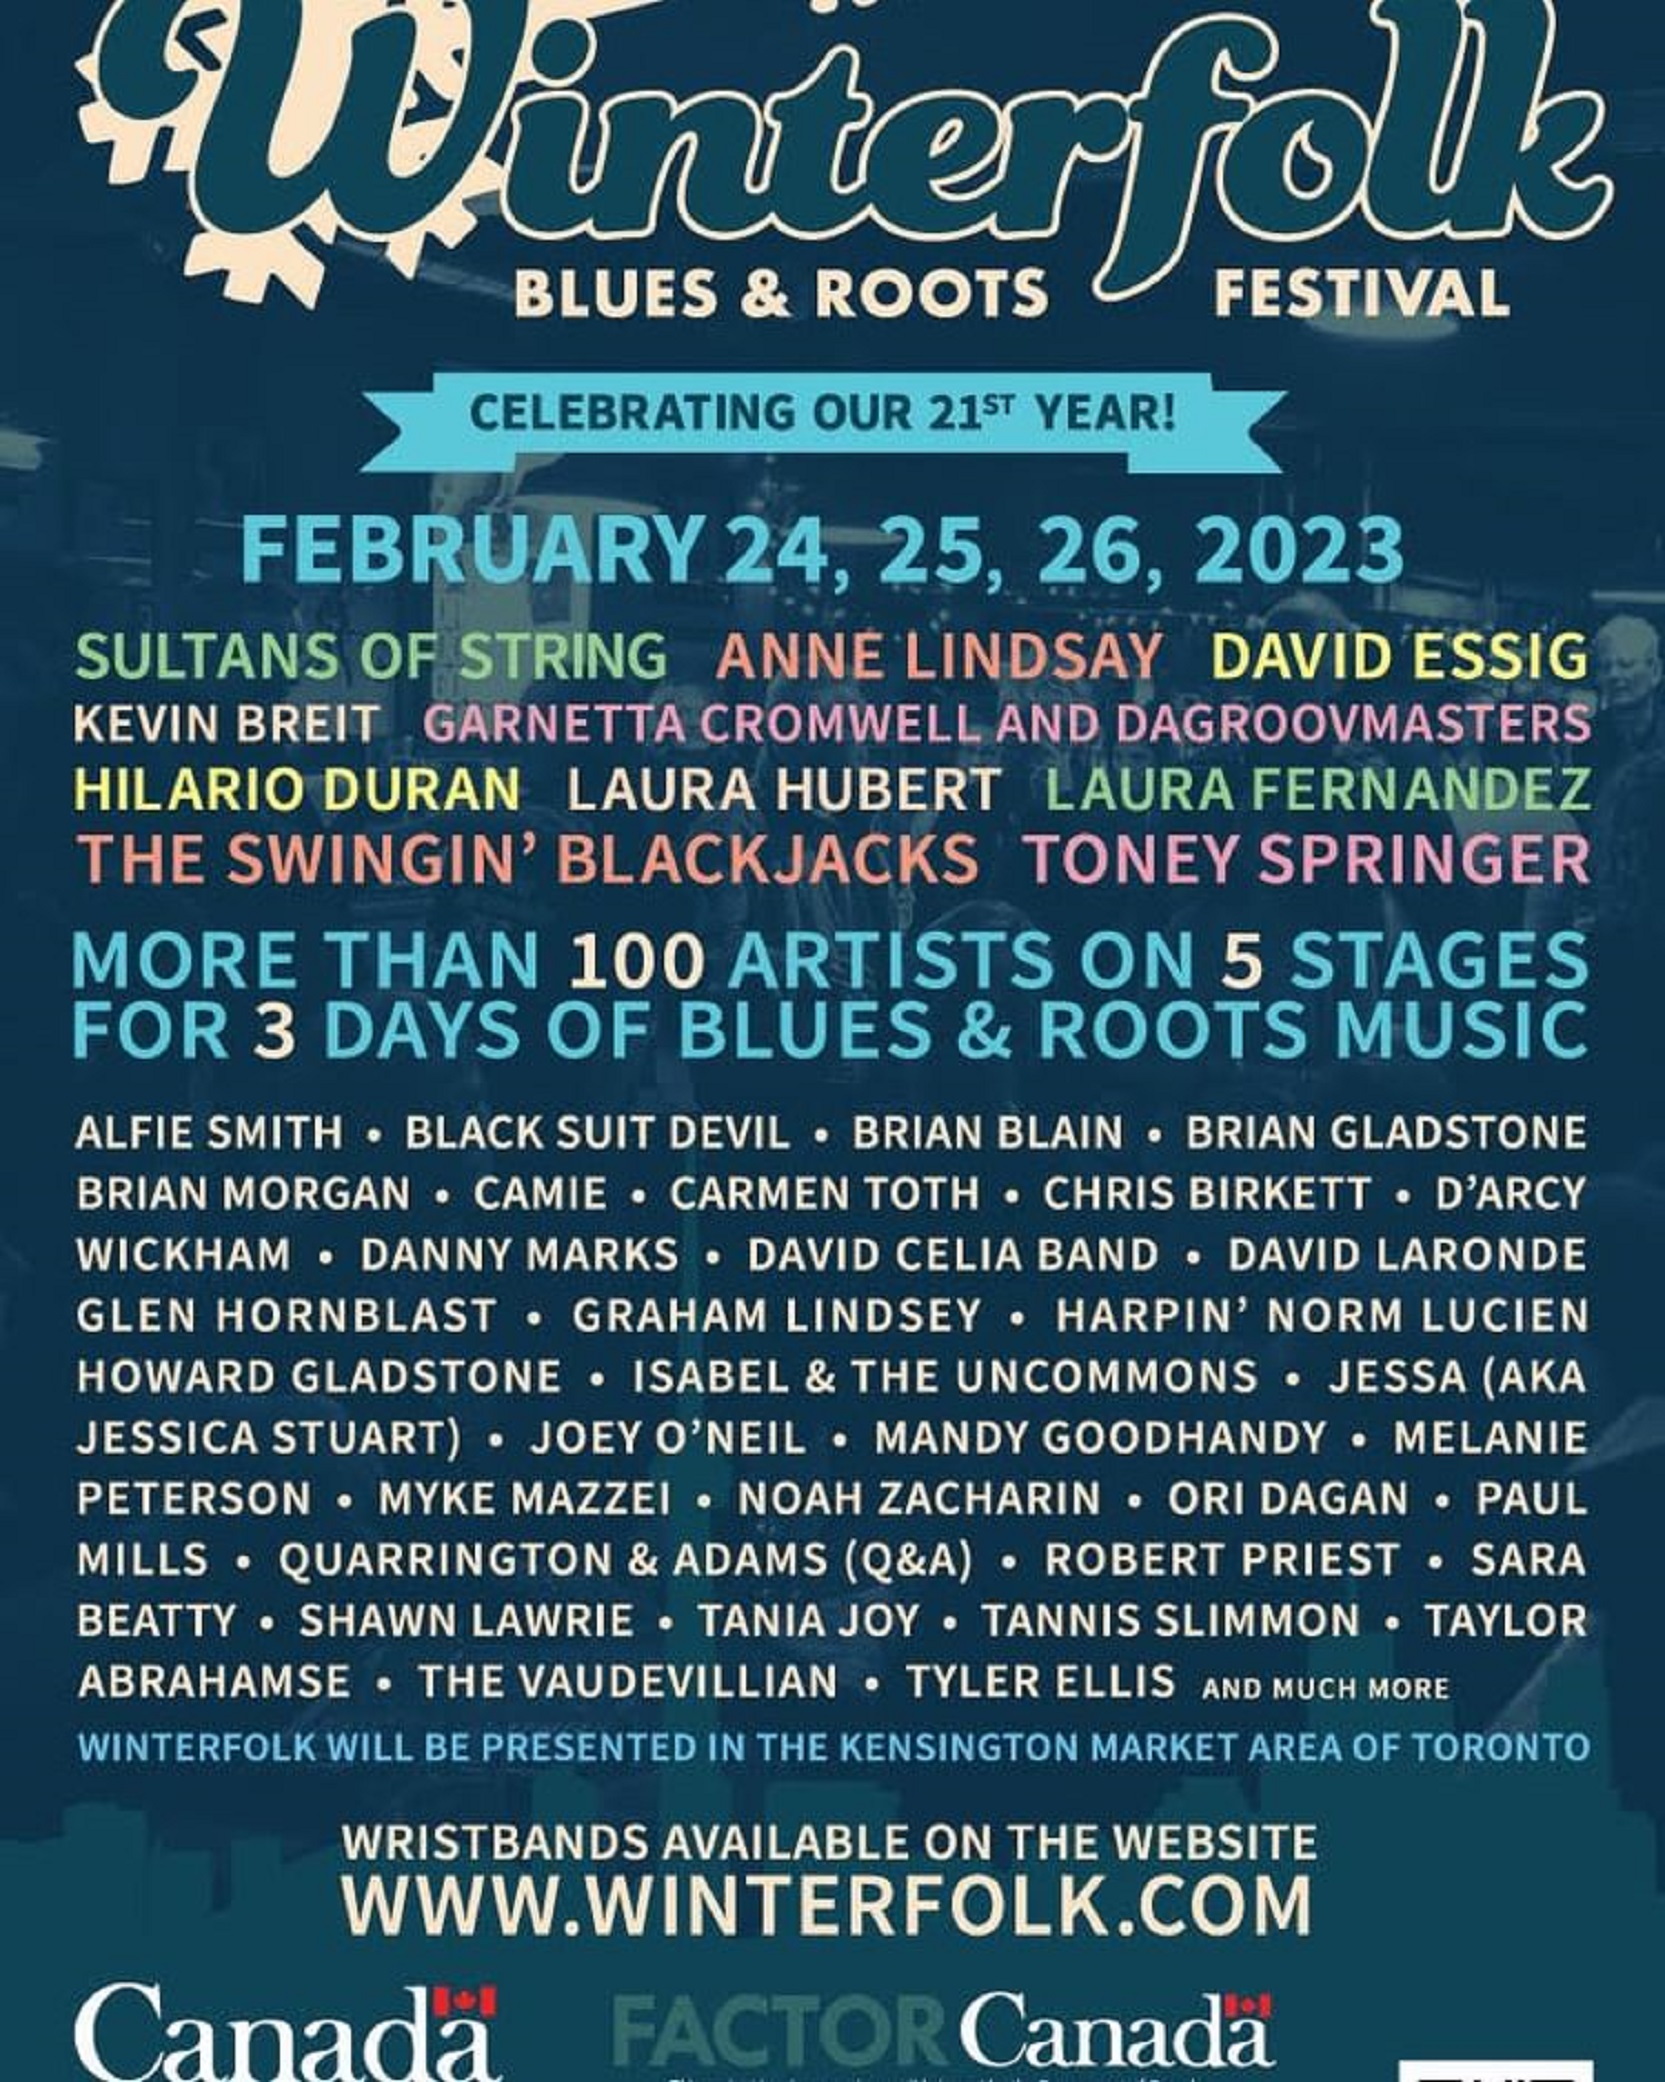 Toronto's 21st Annual Winterfolk Blues and Roots Festival Announces 100 More Artists